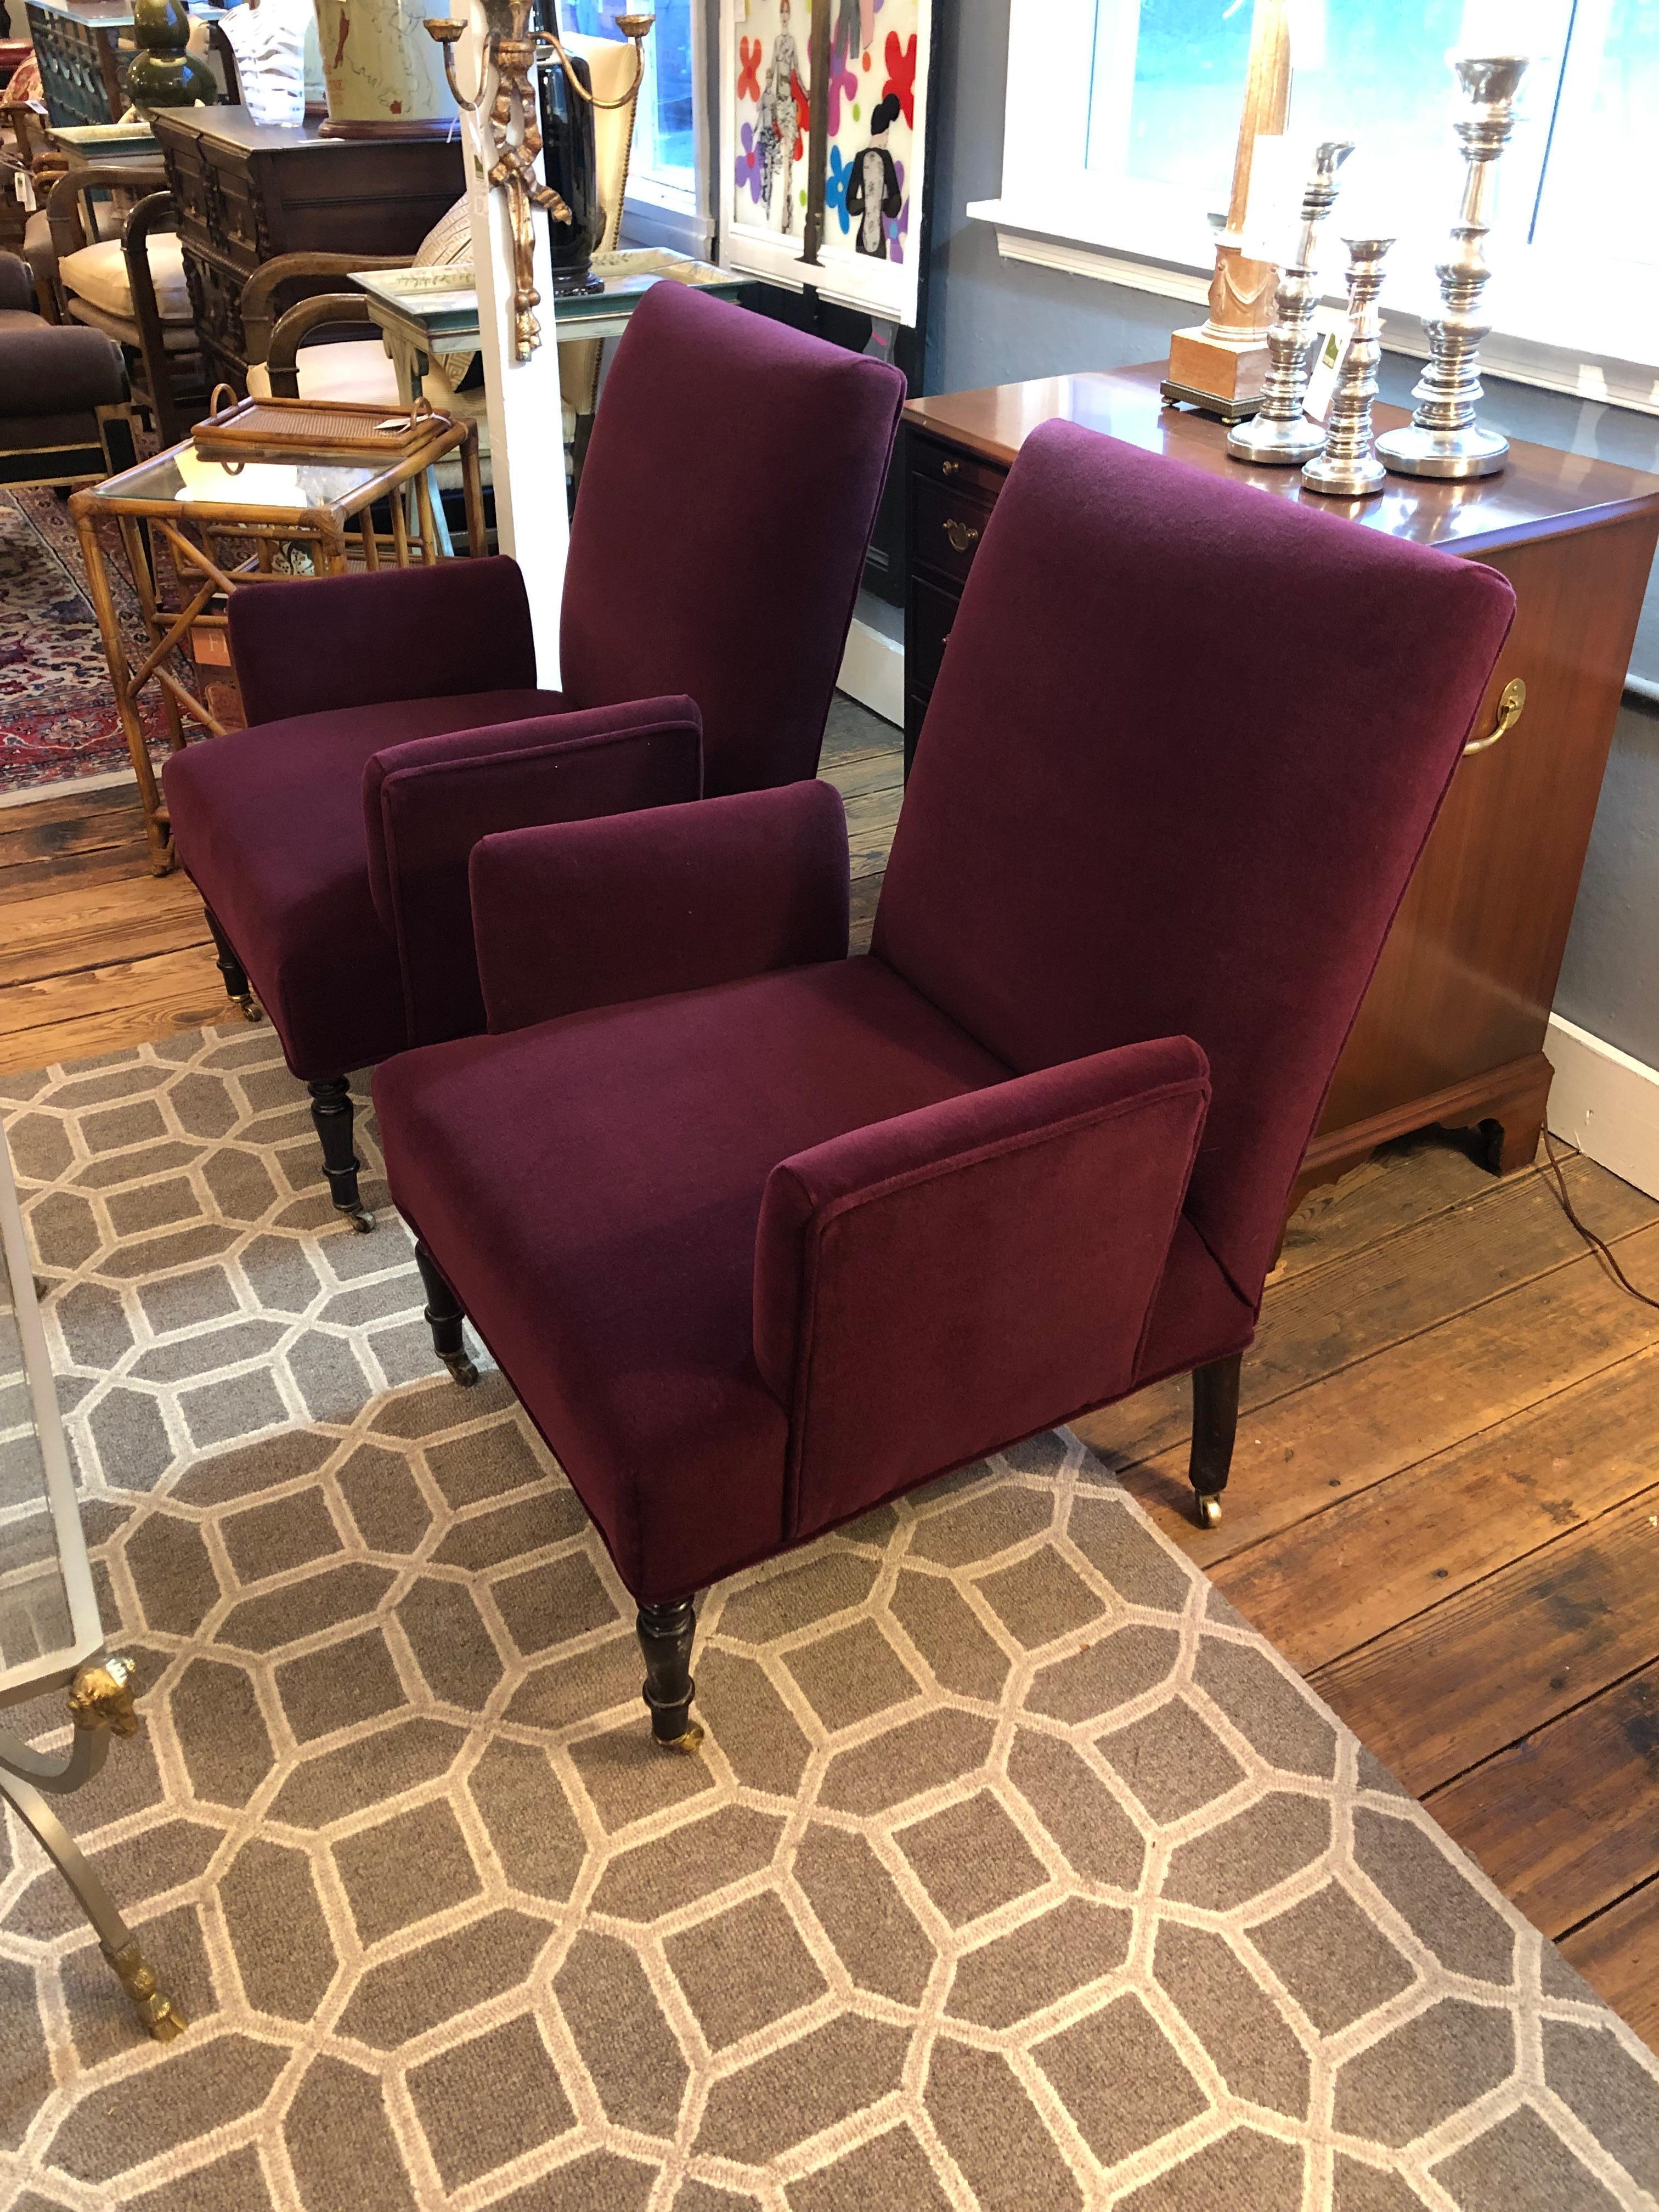 Pair of stunning George Smith La Rizza chairs with great styling brand new sumptuous purple mohair upholstery.  Mahogany legs on brass casters. 

Seat height 15.5